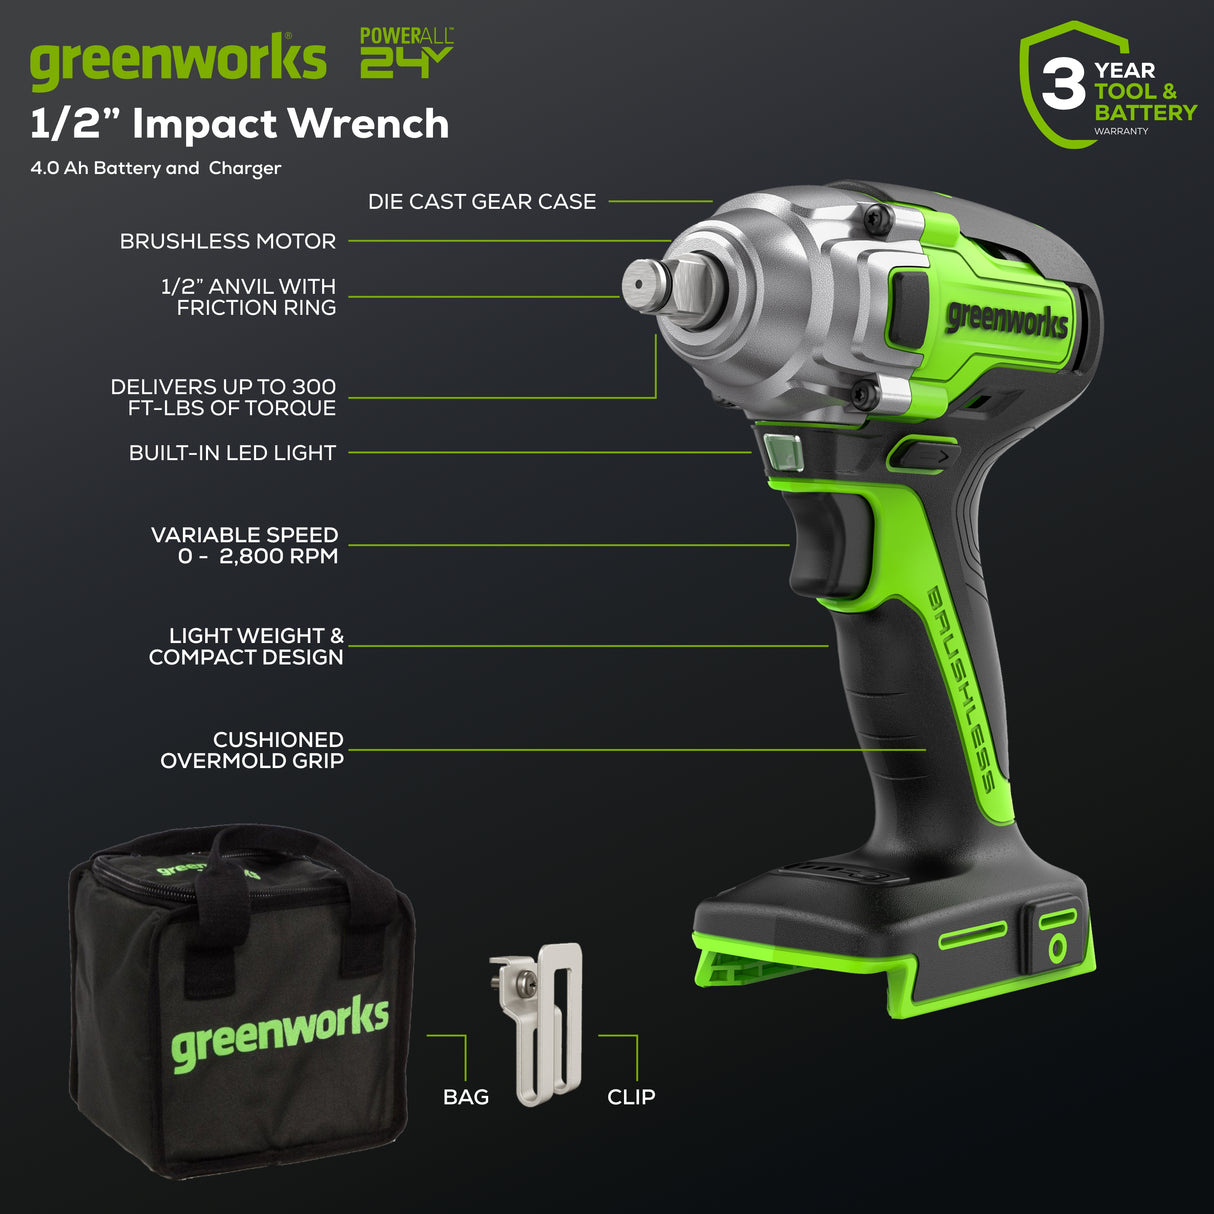 24V Brushless 1/2" Impact Wrench, 4.0Ah Battery and Charger Included